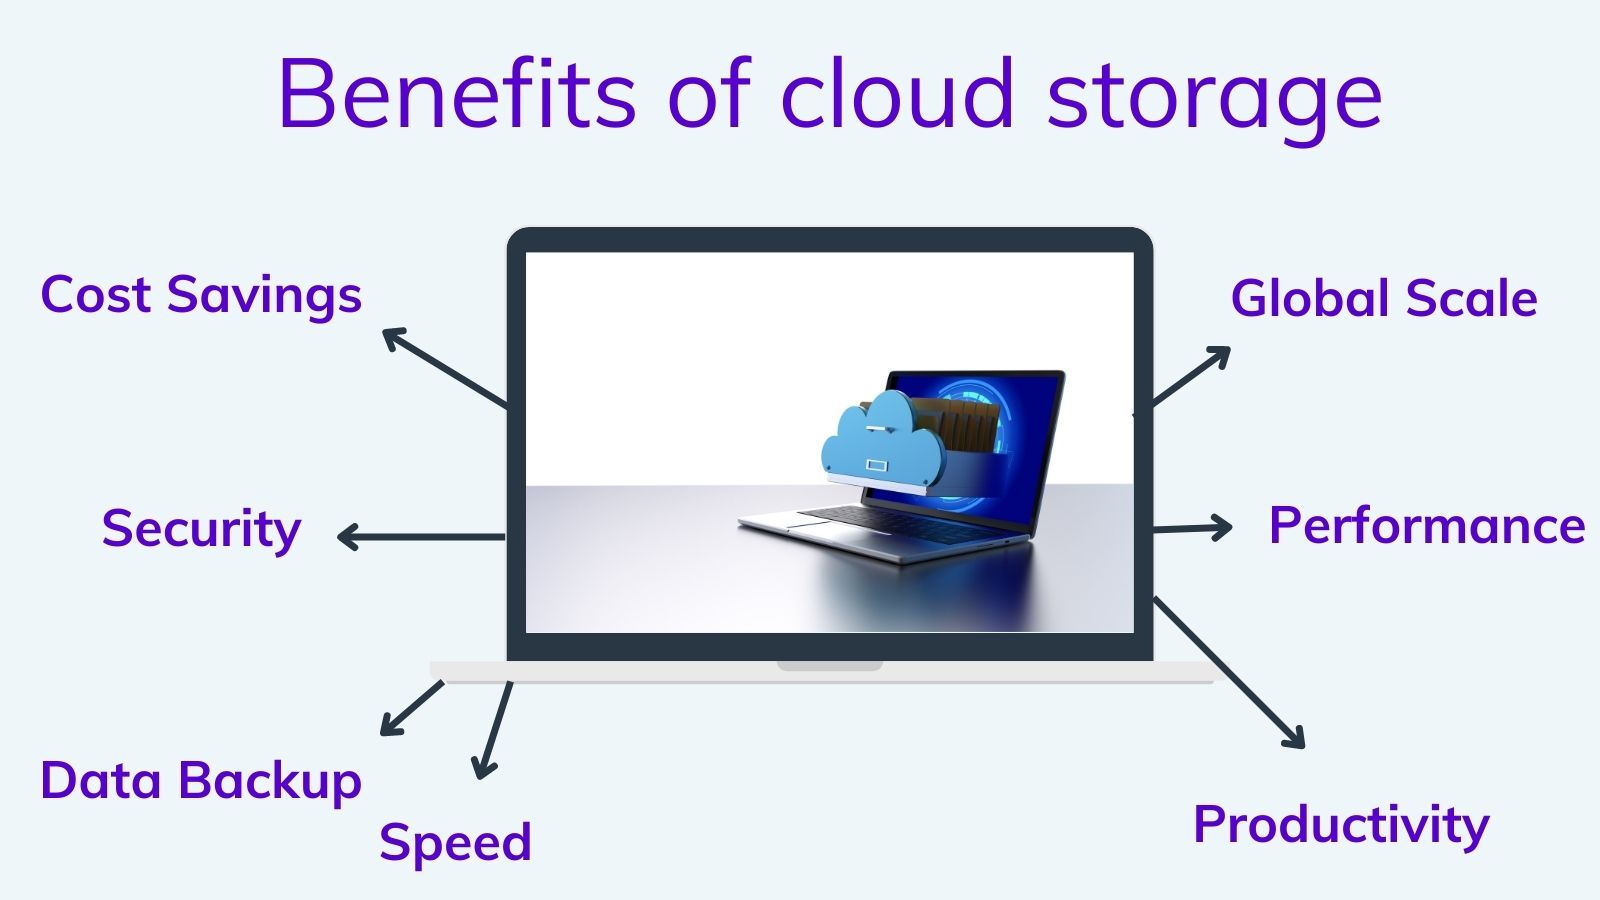 Top benefits of cloud storage for businesses on agilitycms.com